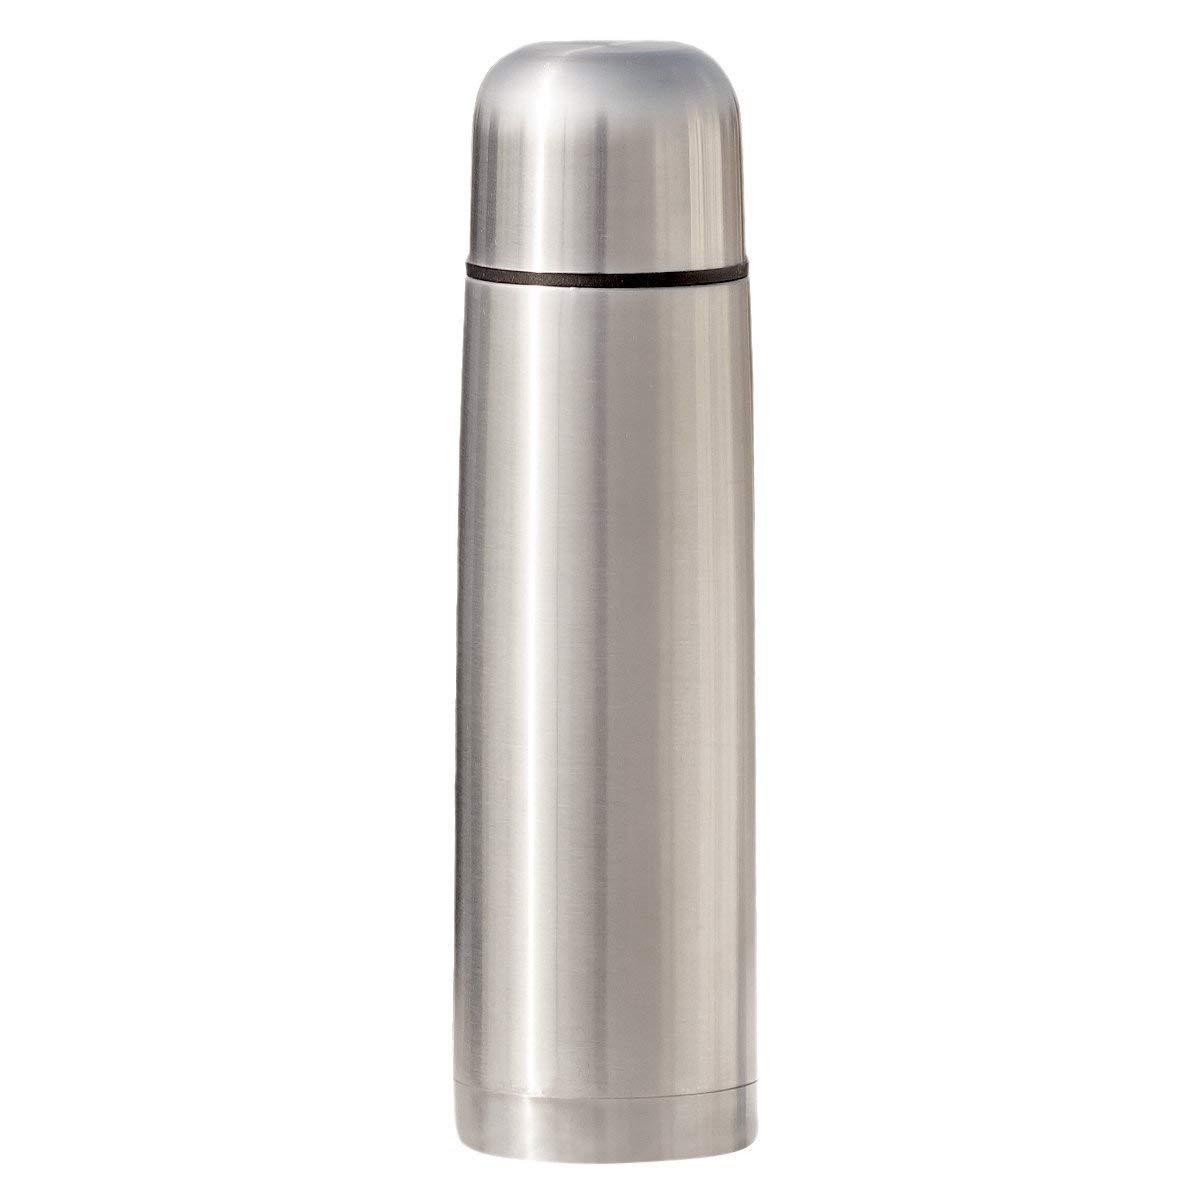 https://www.fijoo.com/wp-content/uploads/2018/10/best_stainless_steel_coffee_thermos.jpg